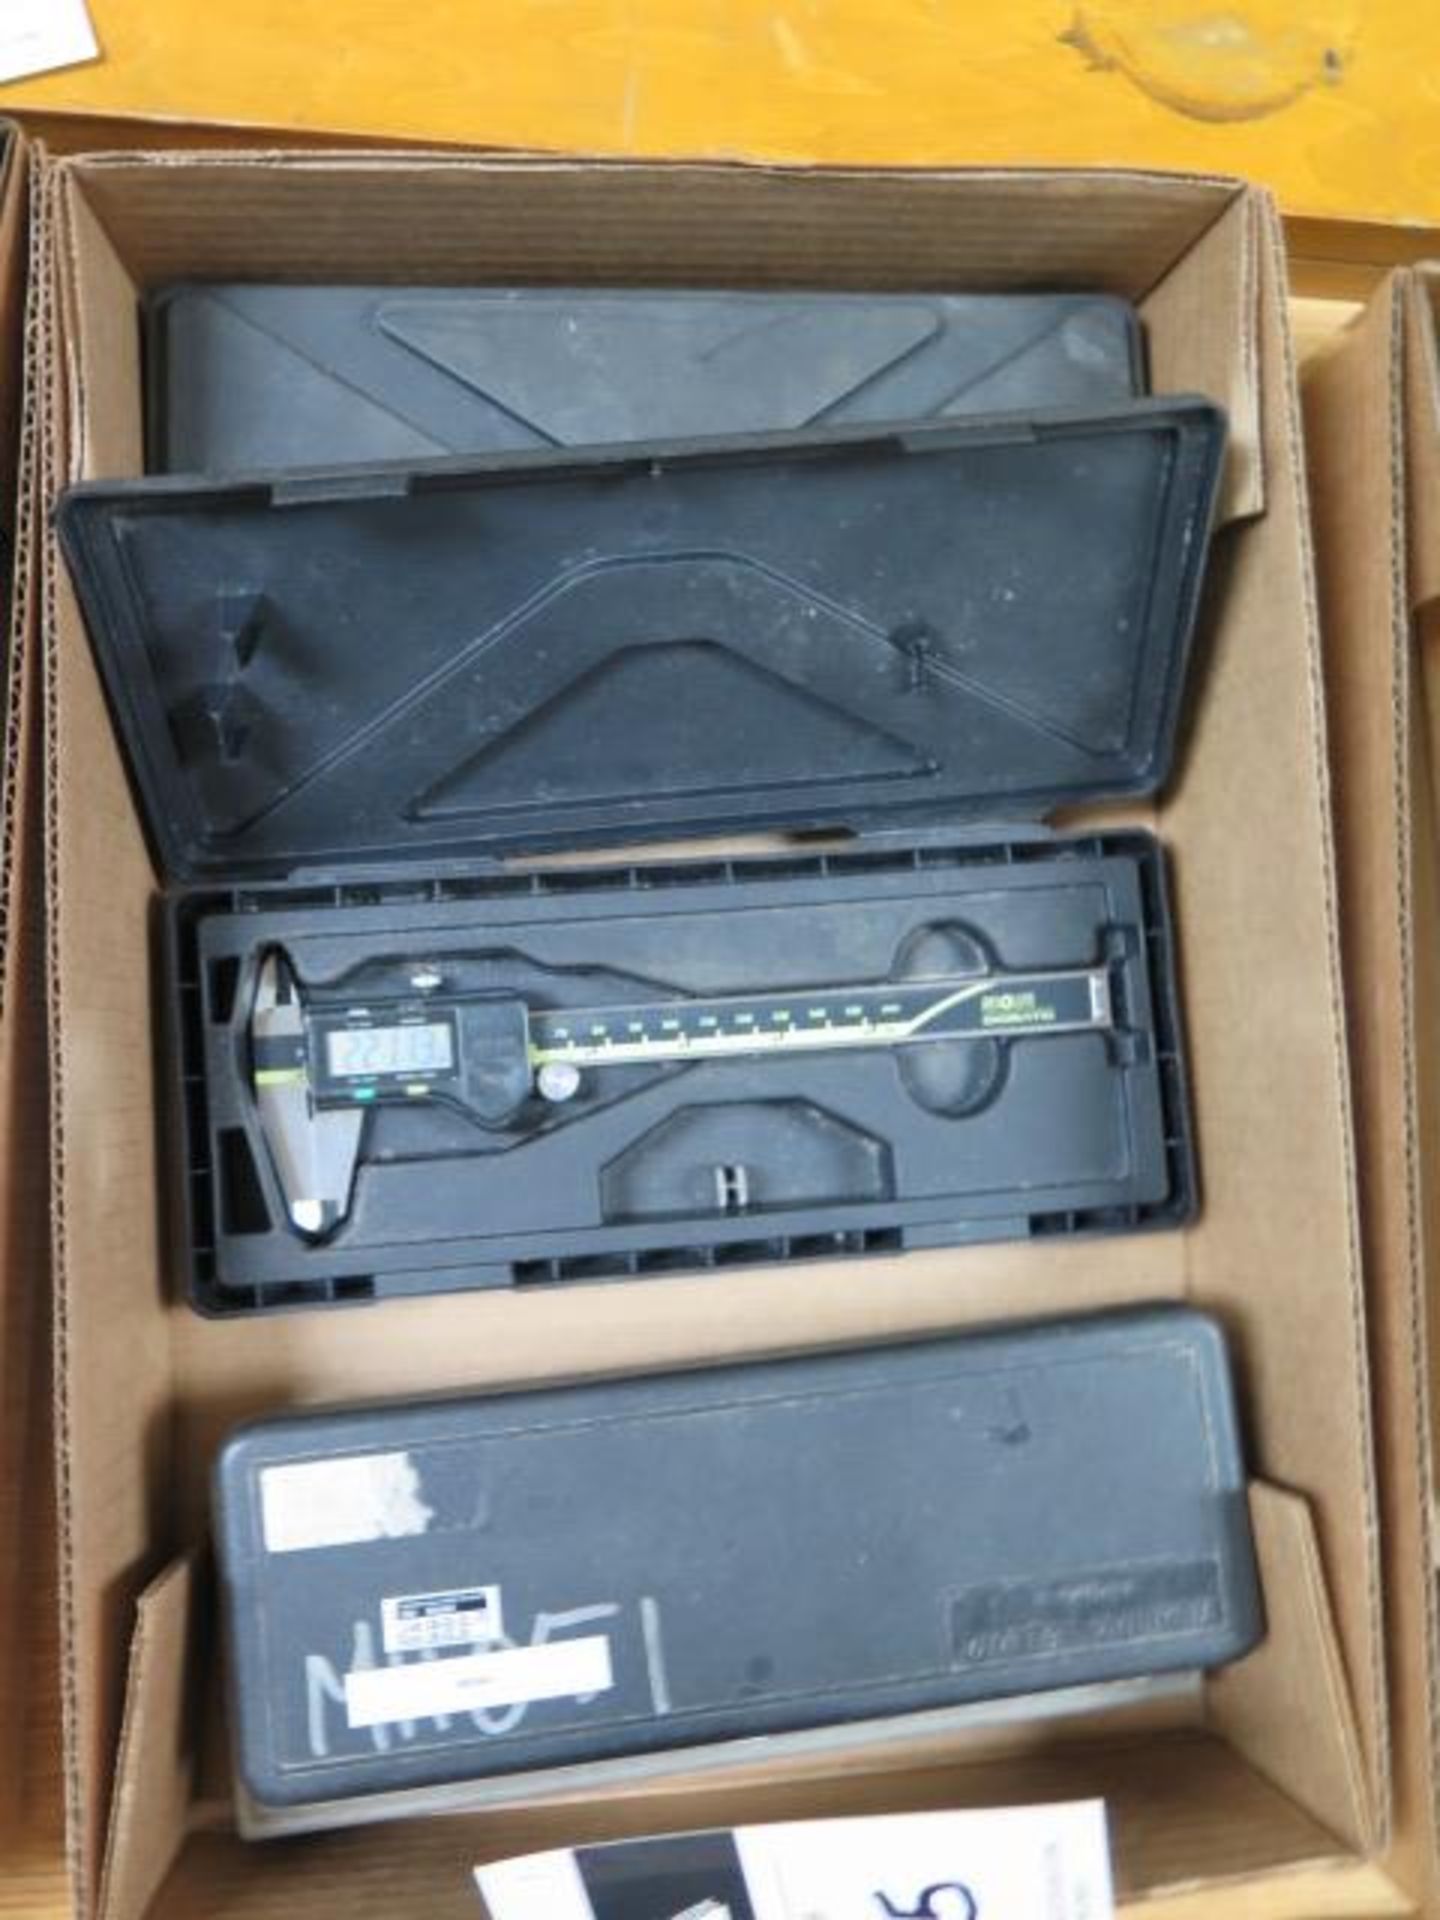 Mitutoyo 6" Digital Calipers (2) and (2) Import 6" Digital Calipers (SOLD AS-IS - NO WARRANTY) - Image 2 of 5